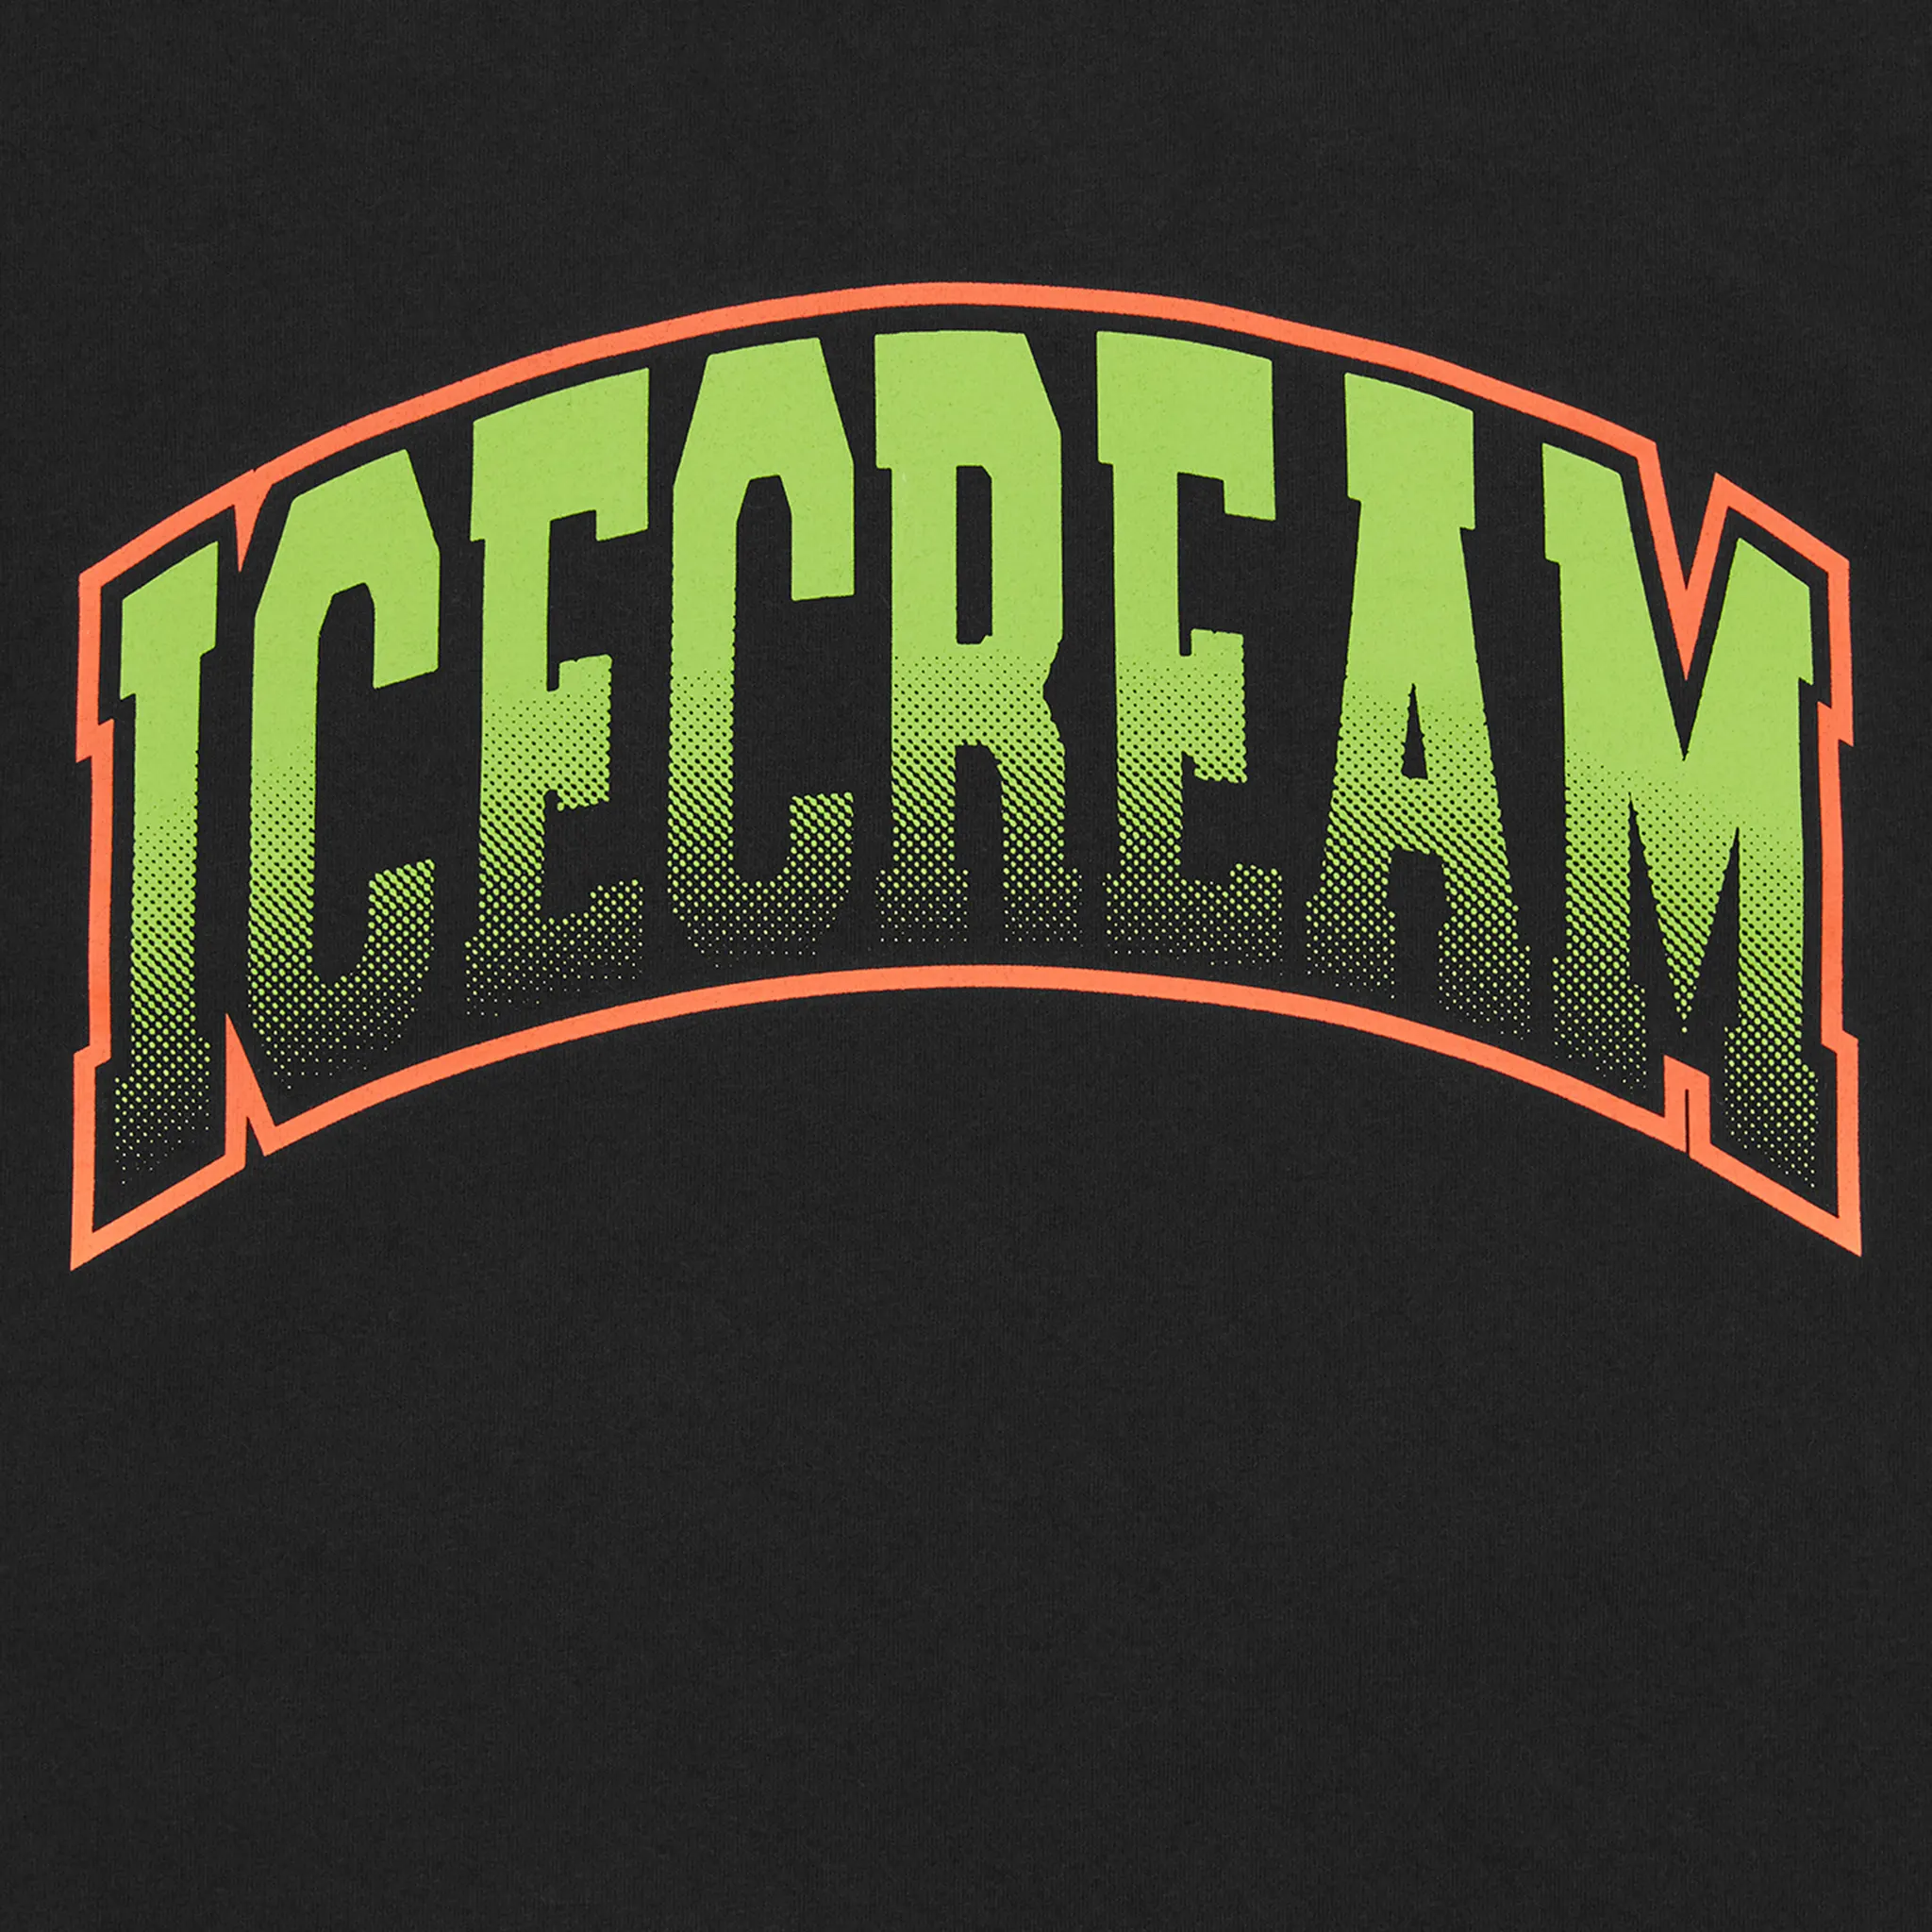 Detail view of Icecream IC College Black T Shirt ic23436-blk